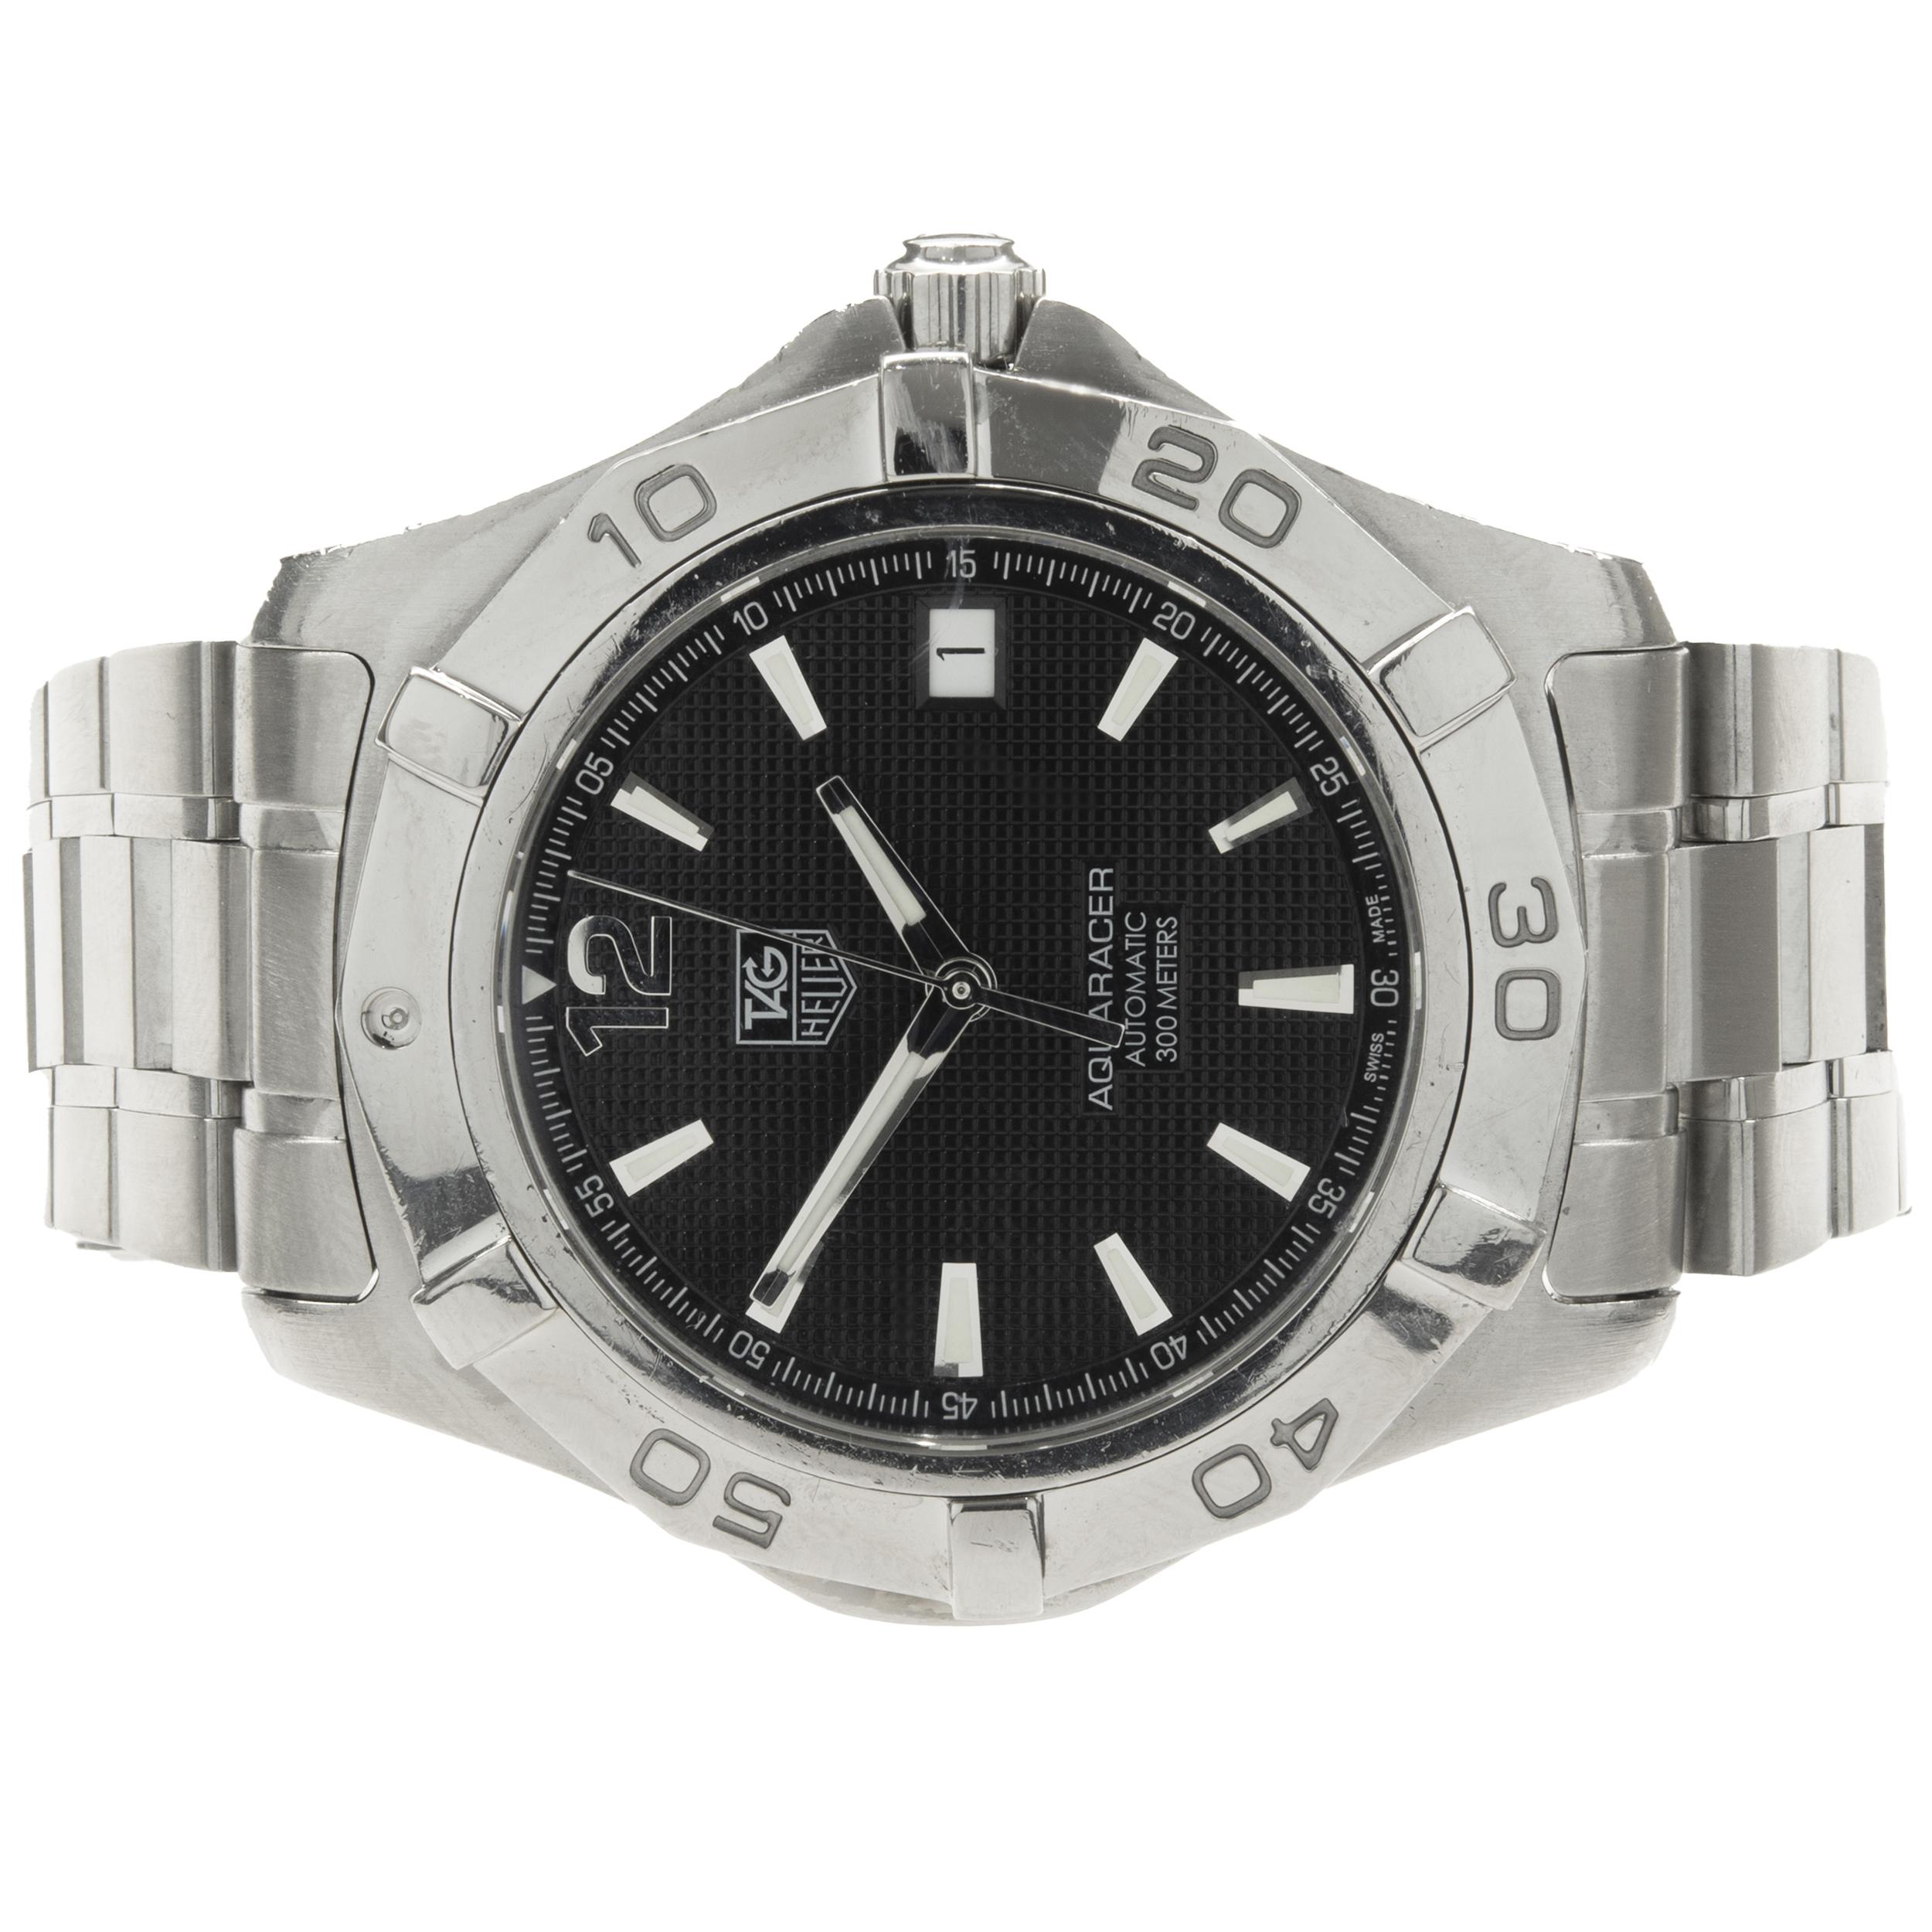 Movement: automatic
Function: hours, minutes, seconds, date
Case: 43mm round case, push/pull crown, sapphire crystal, uni-directional rotating bezel
Dial: black stick
Band: Tag Heuer stainless steel bracelet, deployment clasp
Reference#: